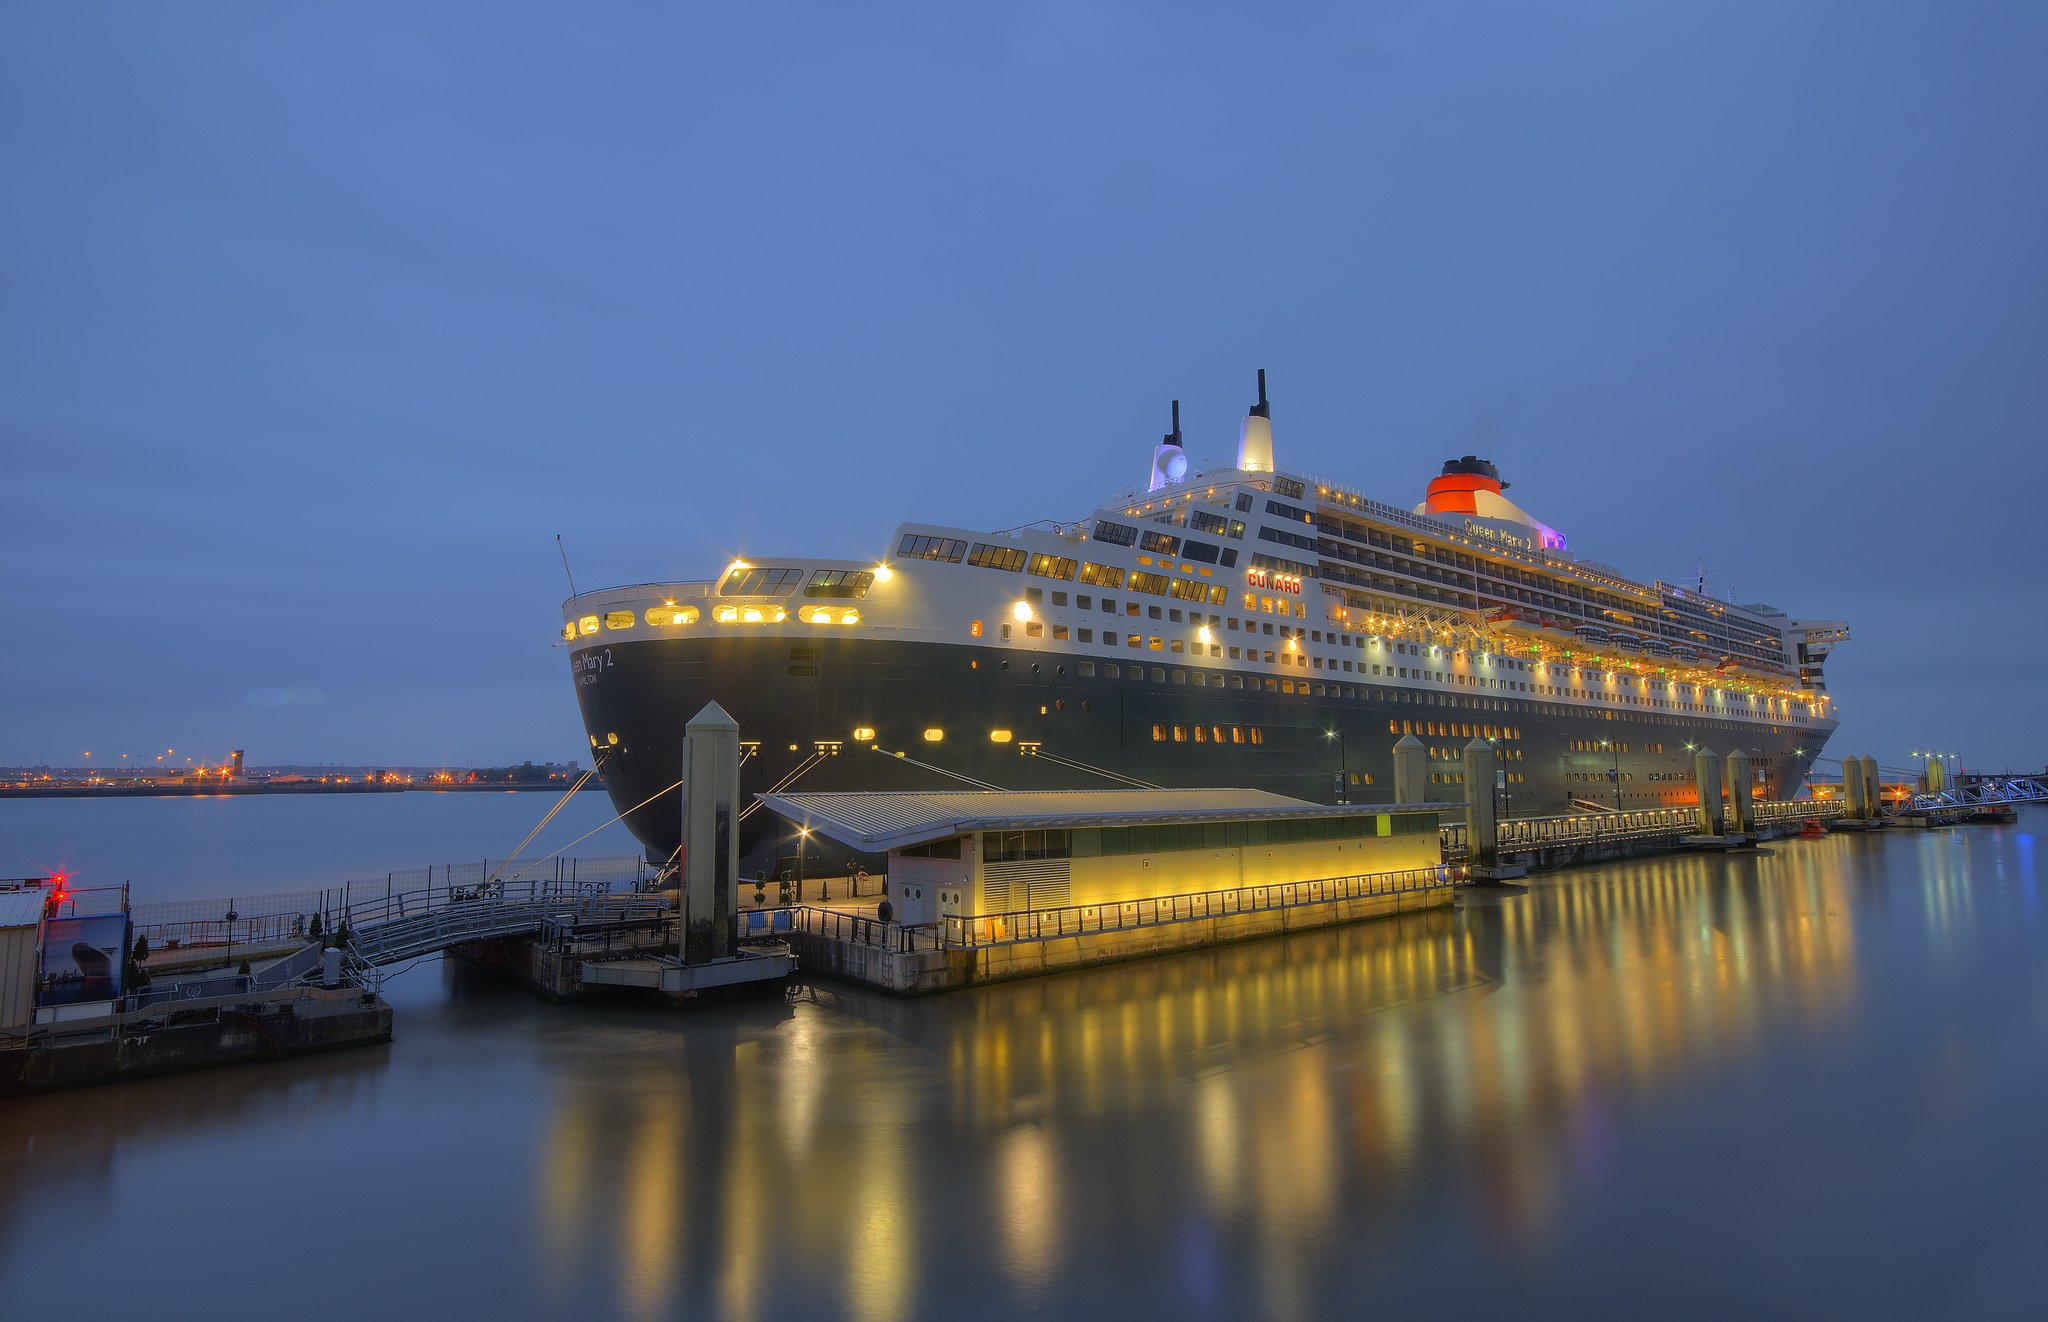 Rms Queen Mary 2 In Liverpool, Uk Wallpaper - Rms Queen Mary 2 - HD Wallpaper 